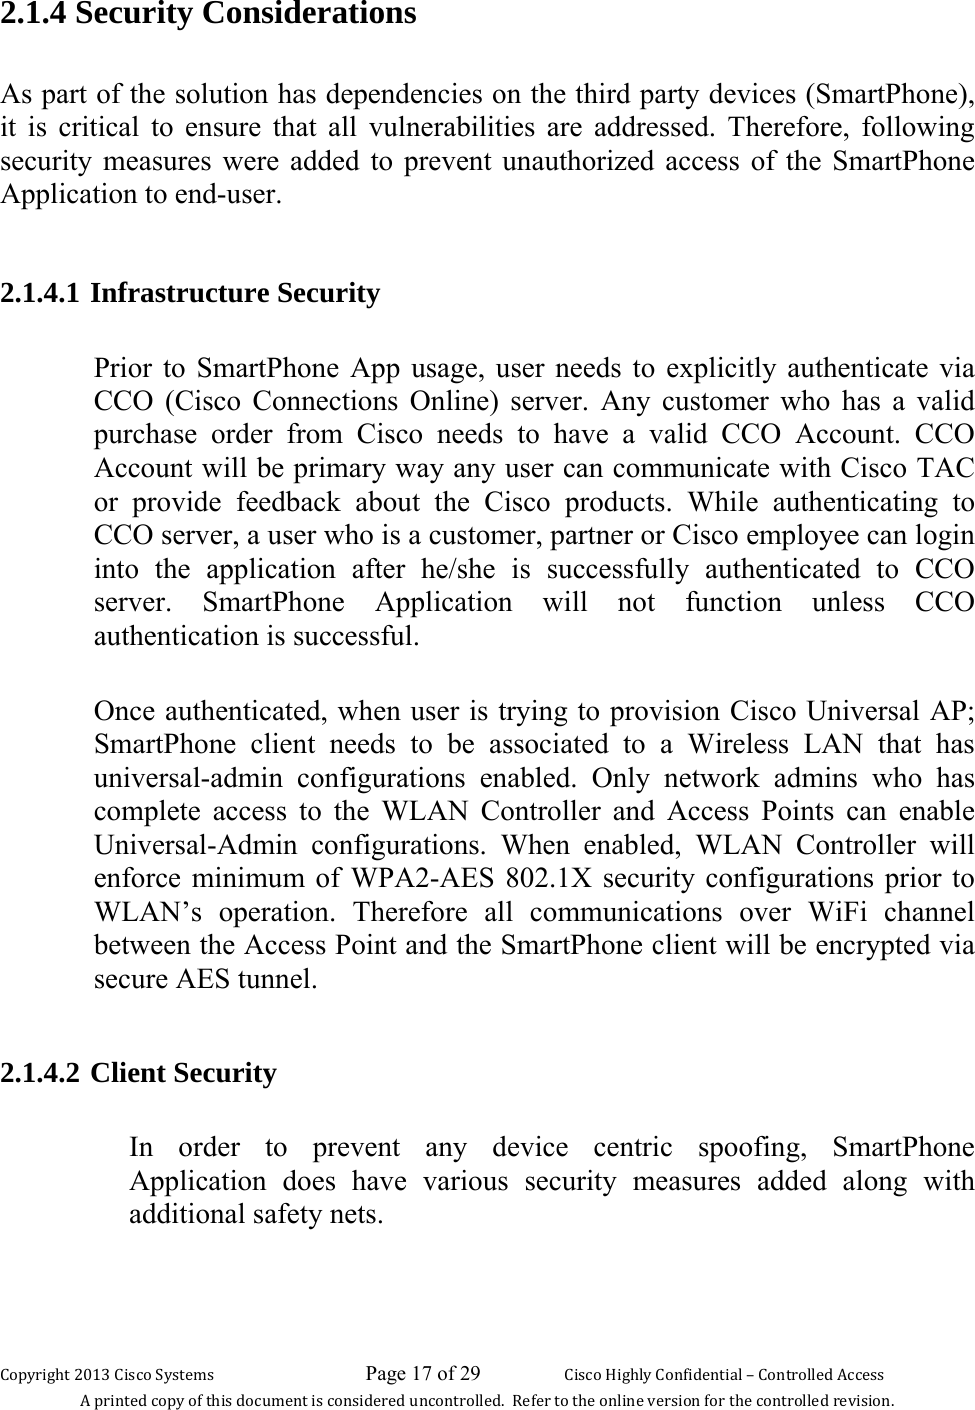 Copyright 2013 Cisco Systems                             Page 17 of 29                     Cisco Highly Confidential – Controlled Access A printed copy of this document is considered uncontrolled.  Refer to the online version for the controlled revision. 2.1.4 Security Considerations  As part of the solution has dependencies on the third party devices (SmartPhone), it is critical to ensure that all vulnerabilities are addressed. Therefore, following security measures were added to prevent unauthorized access of the SmartPhone Application to end-user.  2.1.4.1 Infrastructure Security  Prior to SmartPhone App usage, user needs to explicitly authenticate via CCO (Cisco Connections Online) server. Any customer who has a valid purchase order from Cisco needs to have a valid CCO Account. CCO Account will be primary way any user can communicate with Cisco TAC or provide feedback about the Cisco products. While authenticating to CCO server, a user who is a customer, partner or Cisco employee can login into the application after he/she is successfully authenticated to CCO server. SmartPhone Application will not function unless CCO authentication is successful.  Once authenticated, when user is trying to provision Cisco Universal AP; SmartPhone client needs to be associated to a Wireless LAN that has universal-admin configurations enabled. Only network admins who has complete access to the WLAN Controller and Access Points can enable Universal-Admin configurations. When enabled, WLAN Controller will enforce minimum of WPA2-AES 802.1X security configurations prior to WLAN’s operation. Therefore all communications over WiFi channel between the Access Point and the SmartPhone client will be encrypted via secure AES tunnel.   2.1.4.2 Client Security  In order to prevent any device centric spoofing, SmartPhone Application does have various security measures added along with additional safety nets.  